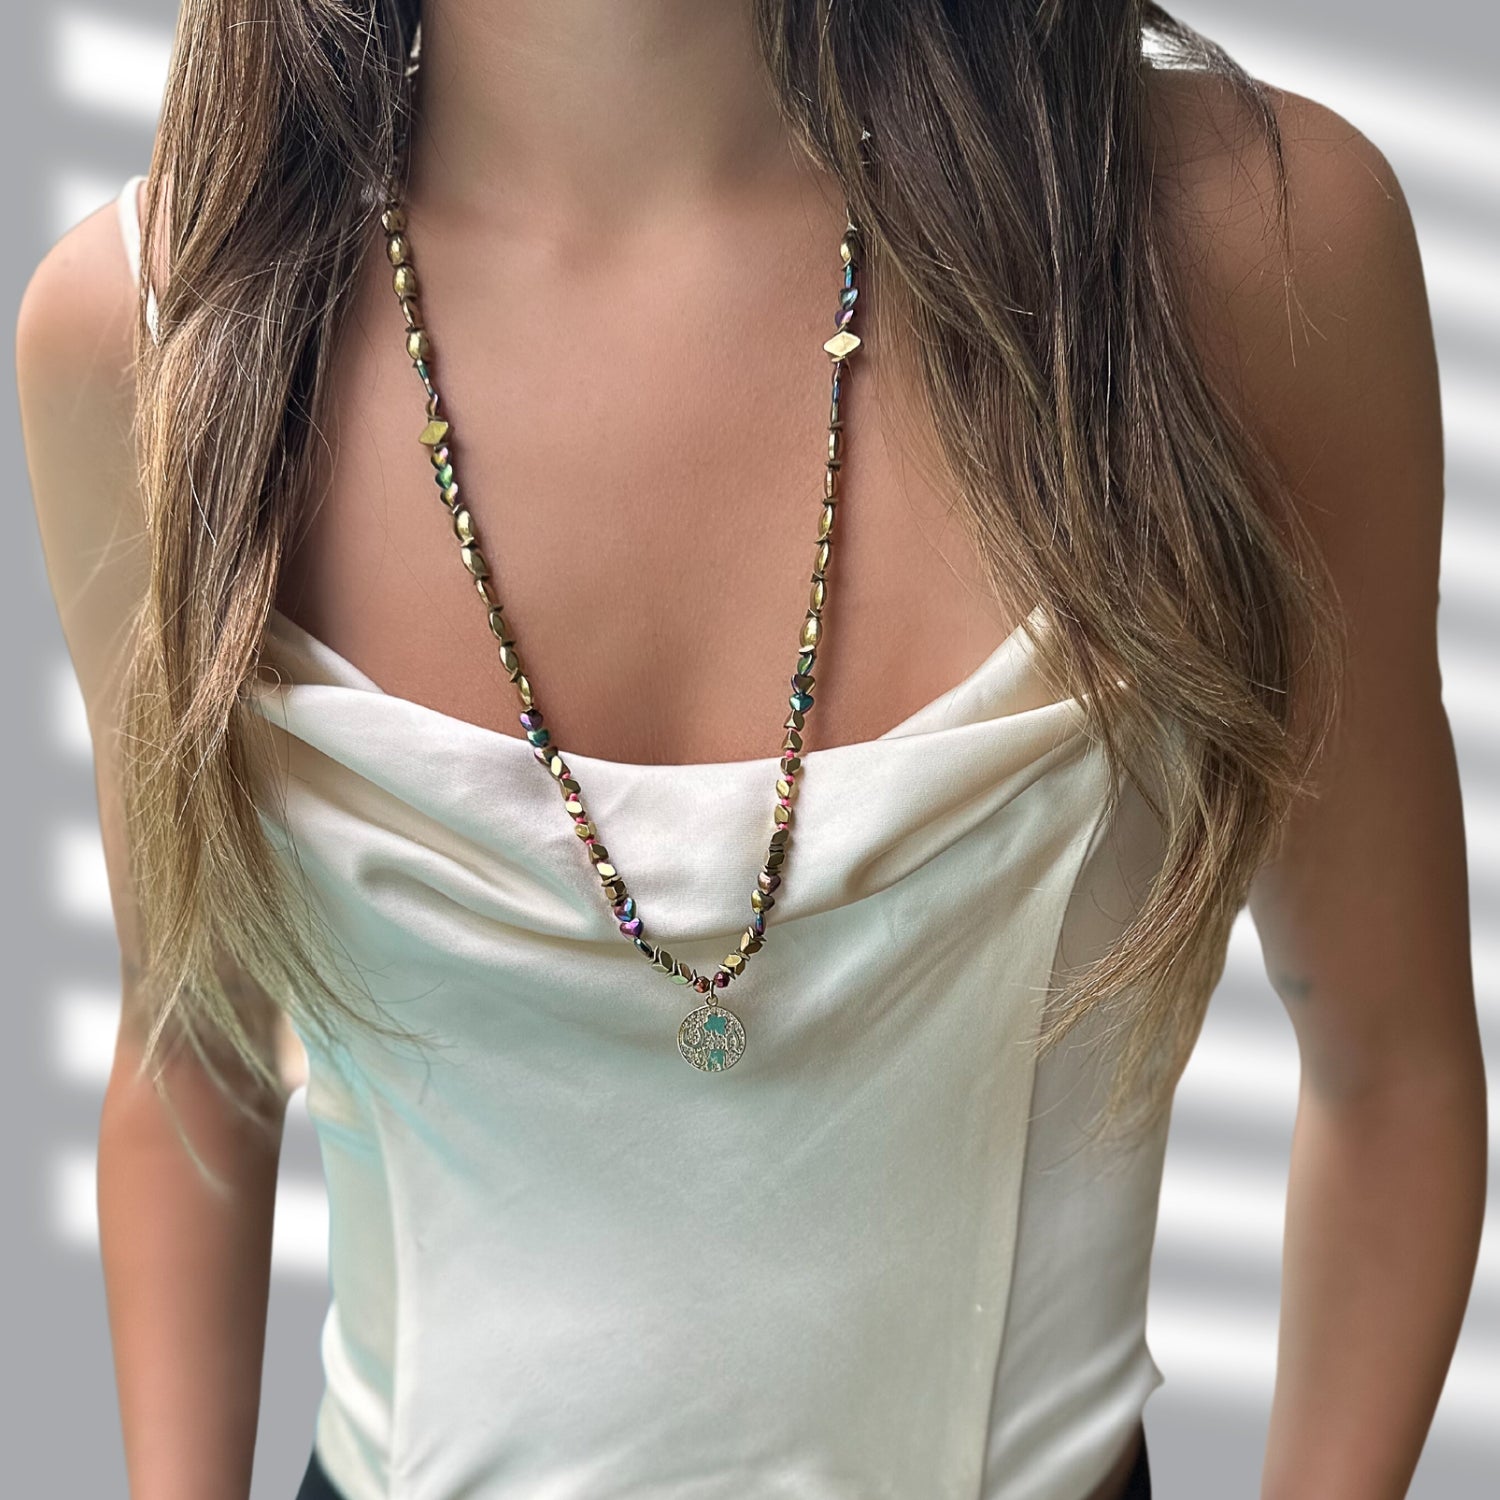 Model Wearing Gold Good Luck Symbol Necklace - A model showcasing the elegant and meaningful Gold Good Luck Symbol Necklace.